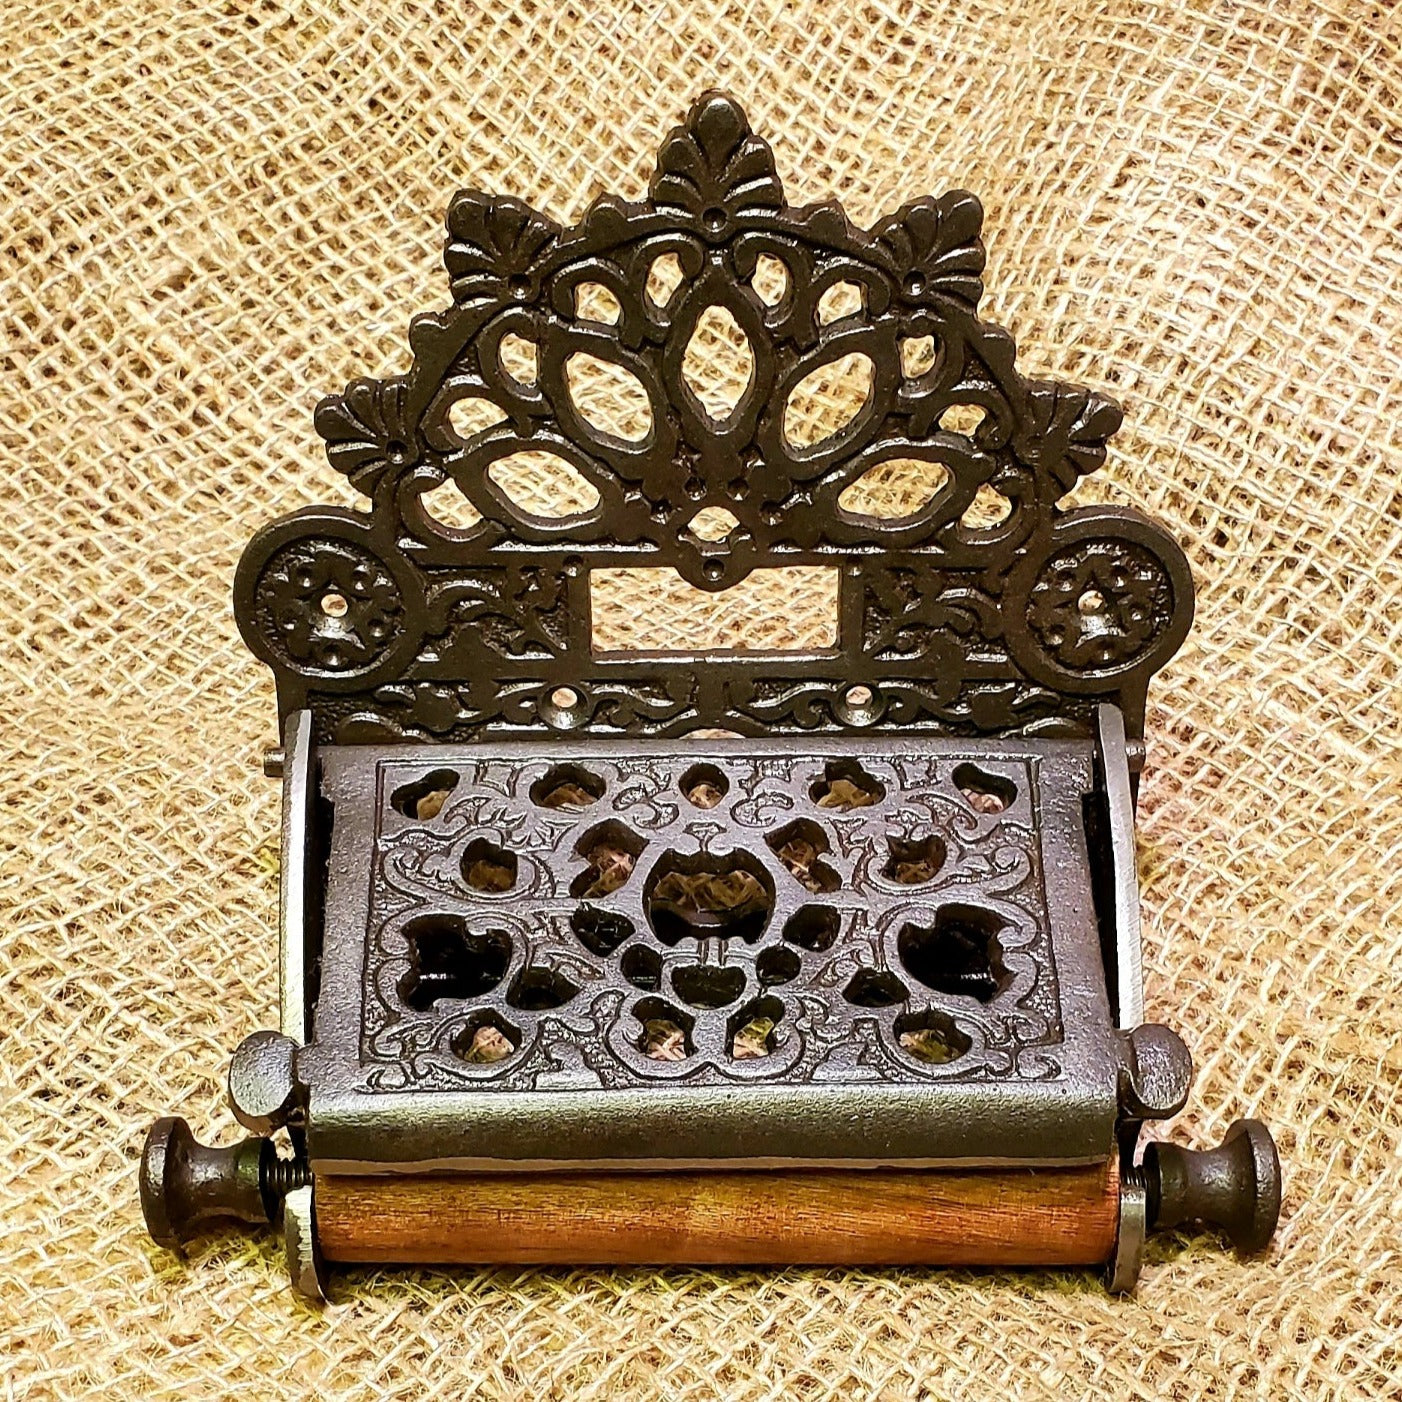 Victorian with Lid Antique Iron - Toilet Paper Holder - Spearhead Collection - Toilet Paper Holders - Bathroom Decor, Home Decor, Interior Decor, Toilet Paper Holders, Victorian